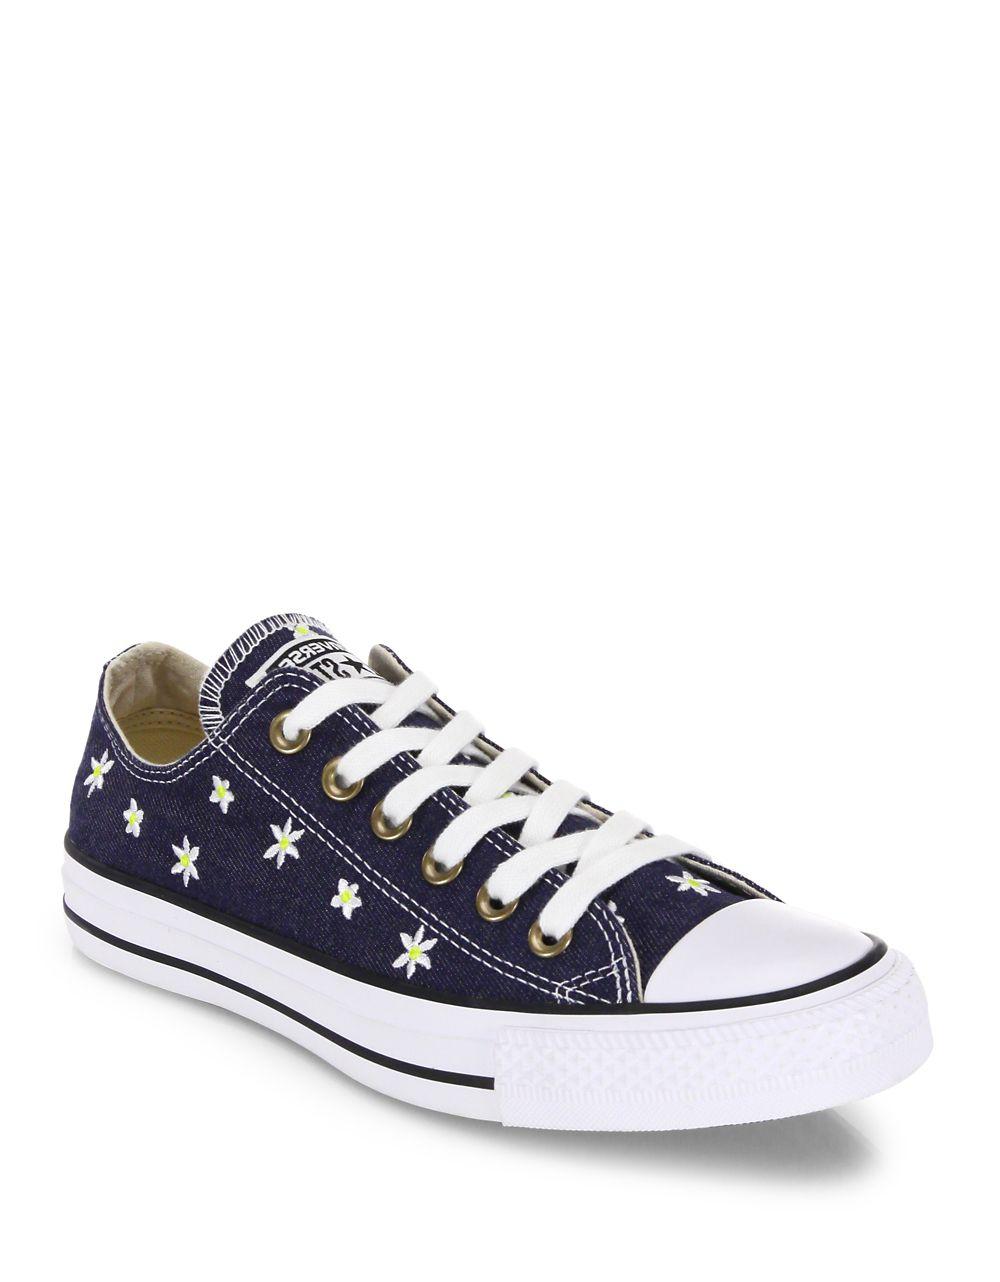 Converse Canvas Women's Chuck Taylor Ox Daisy Print Casual Sneakers ...